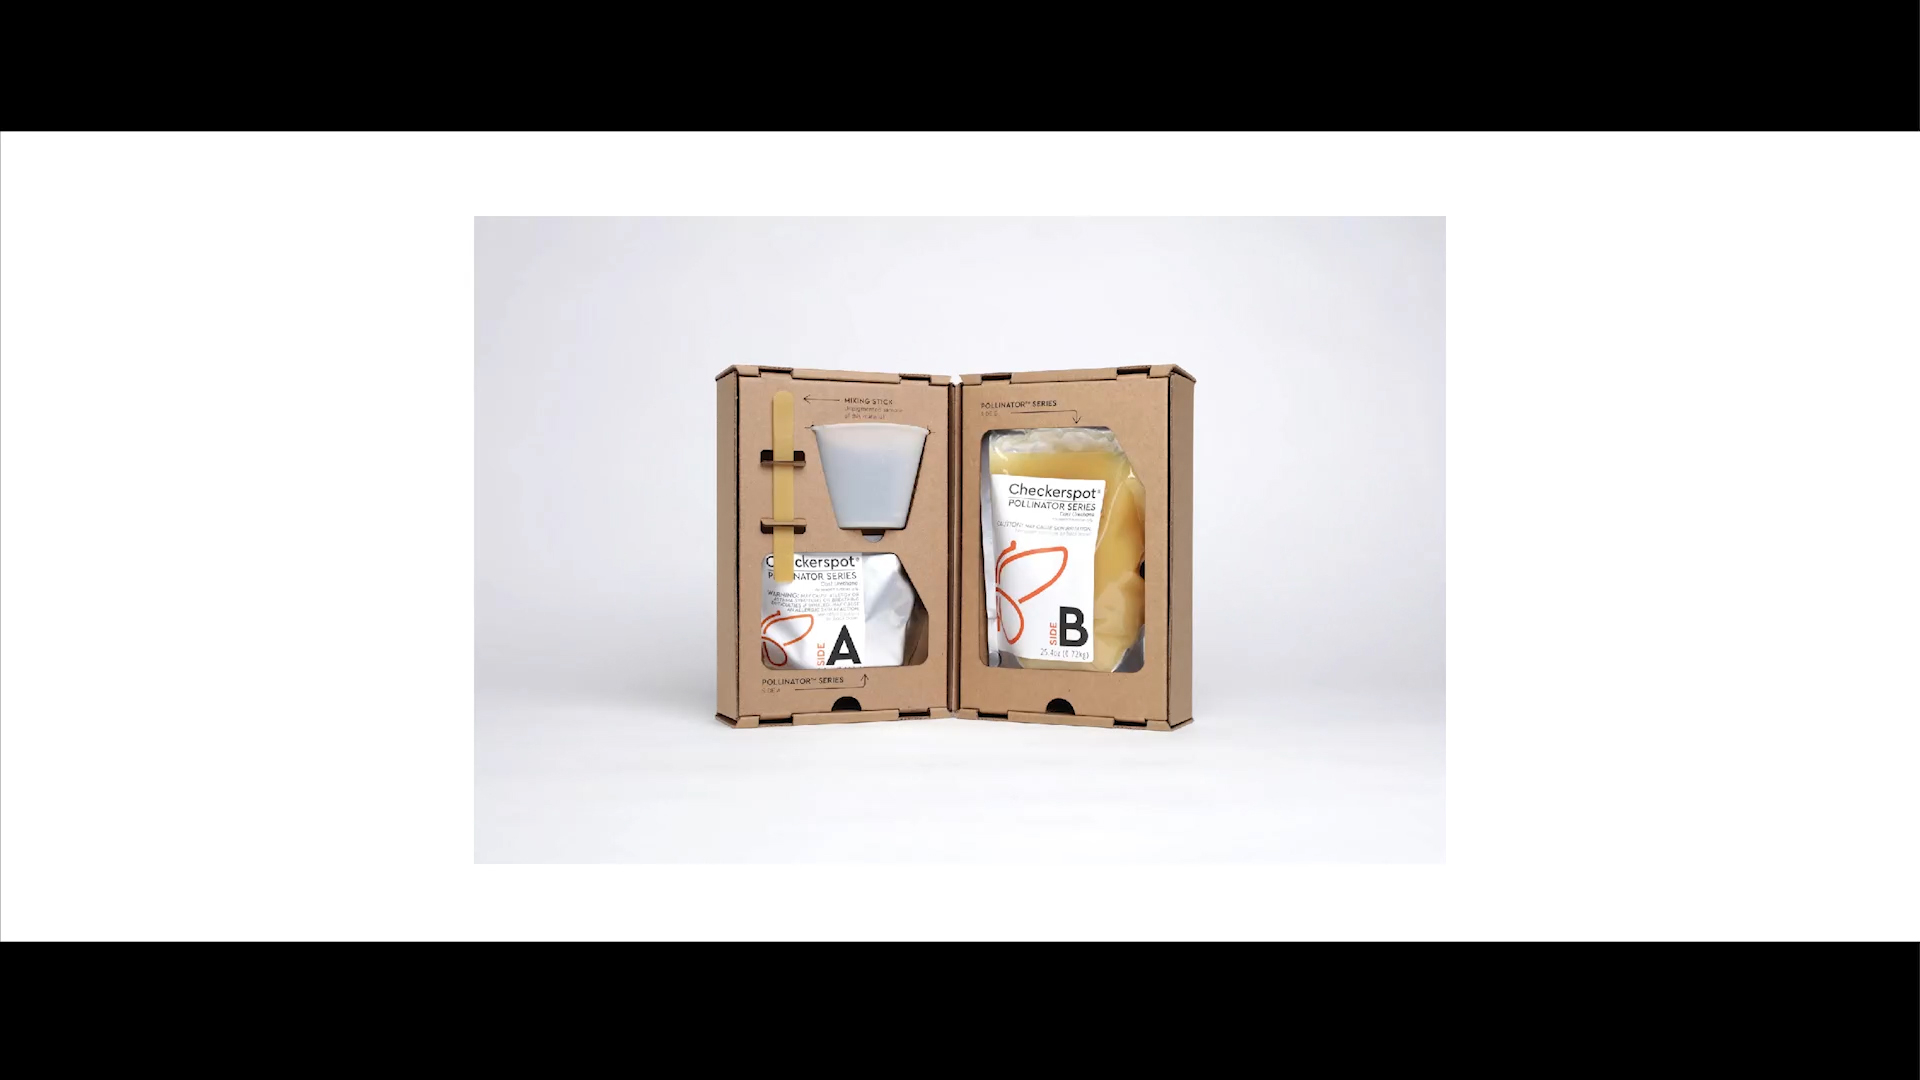 Mitch Heinrich, founder of What For Design and lead designer for the Pollinator™ Kit, shares his vision for renewable materials. (Video: Rory Smith)